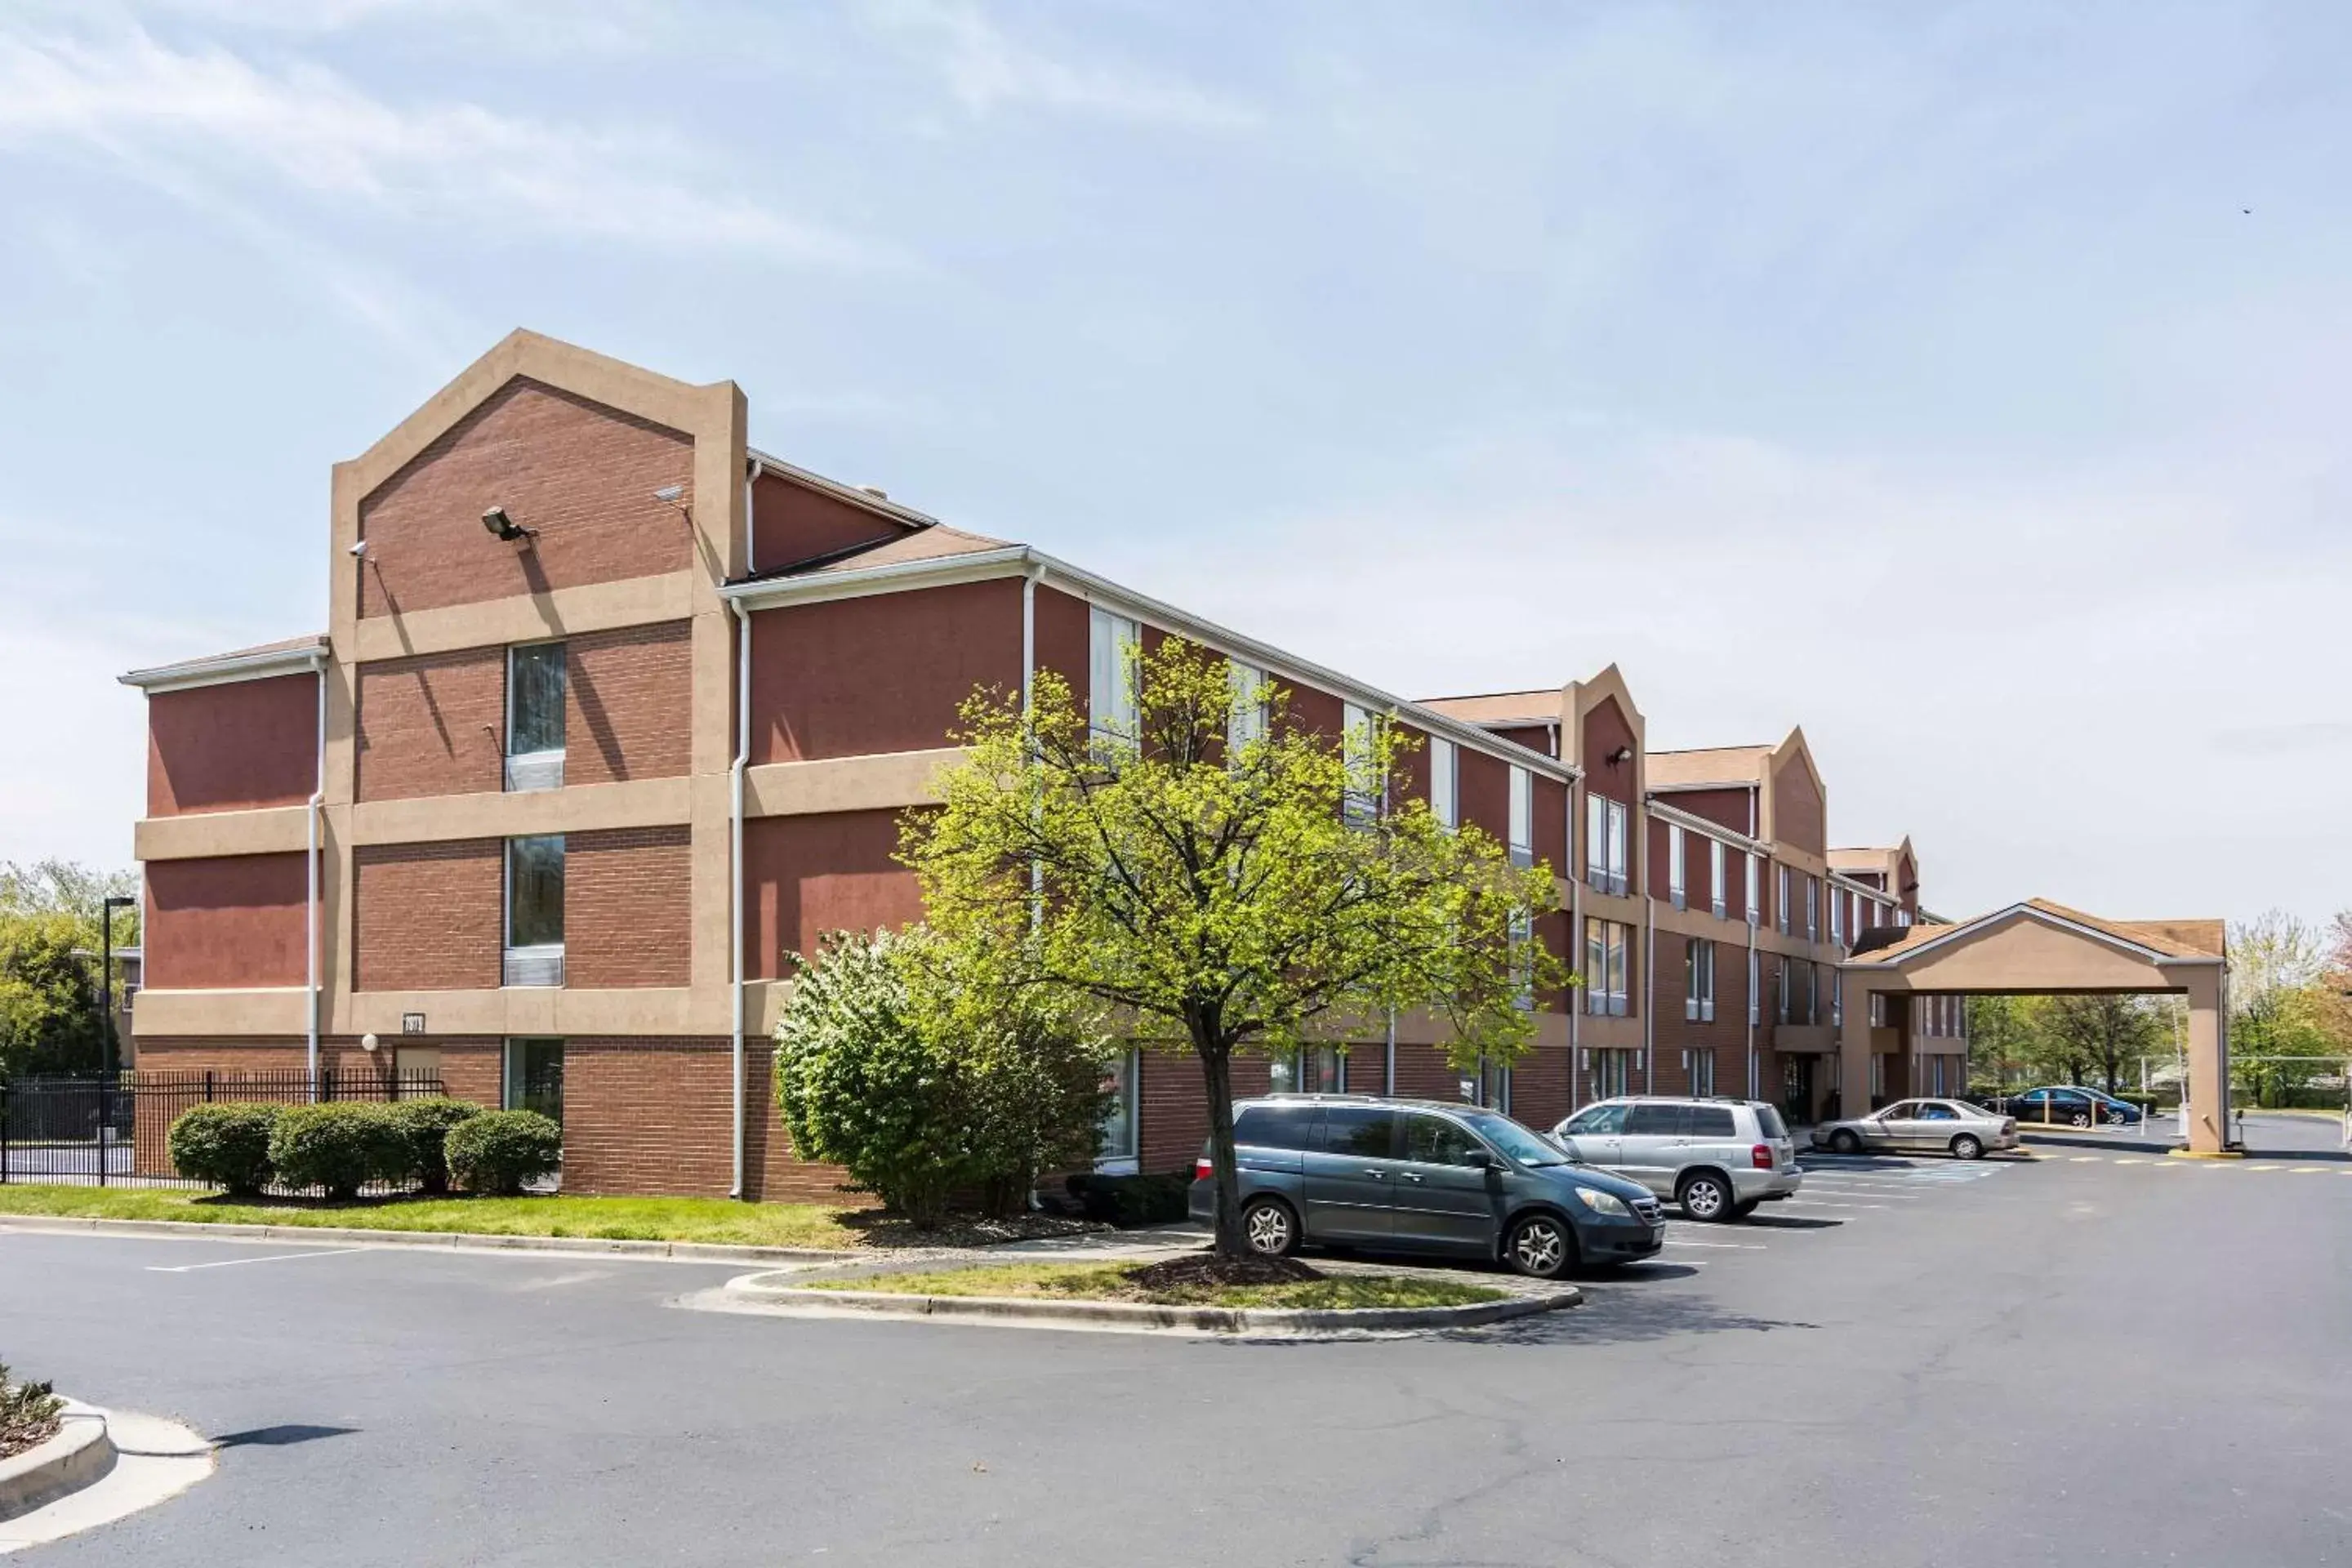 Property Building in Comfort Inn Washington DC Joint Andrews AFB